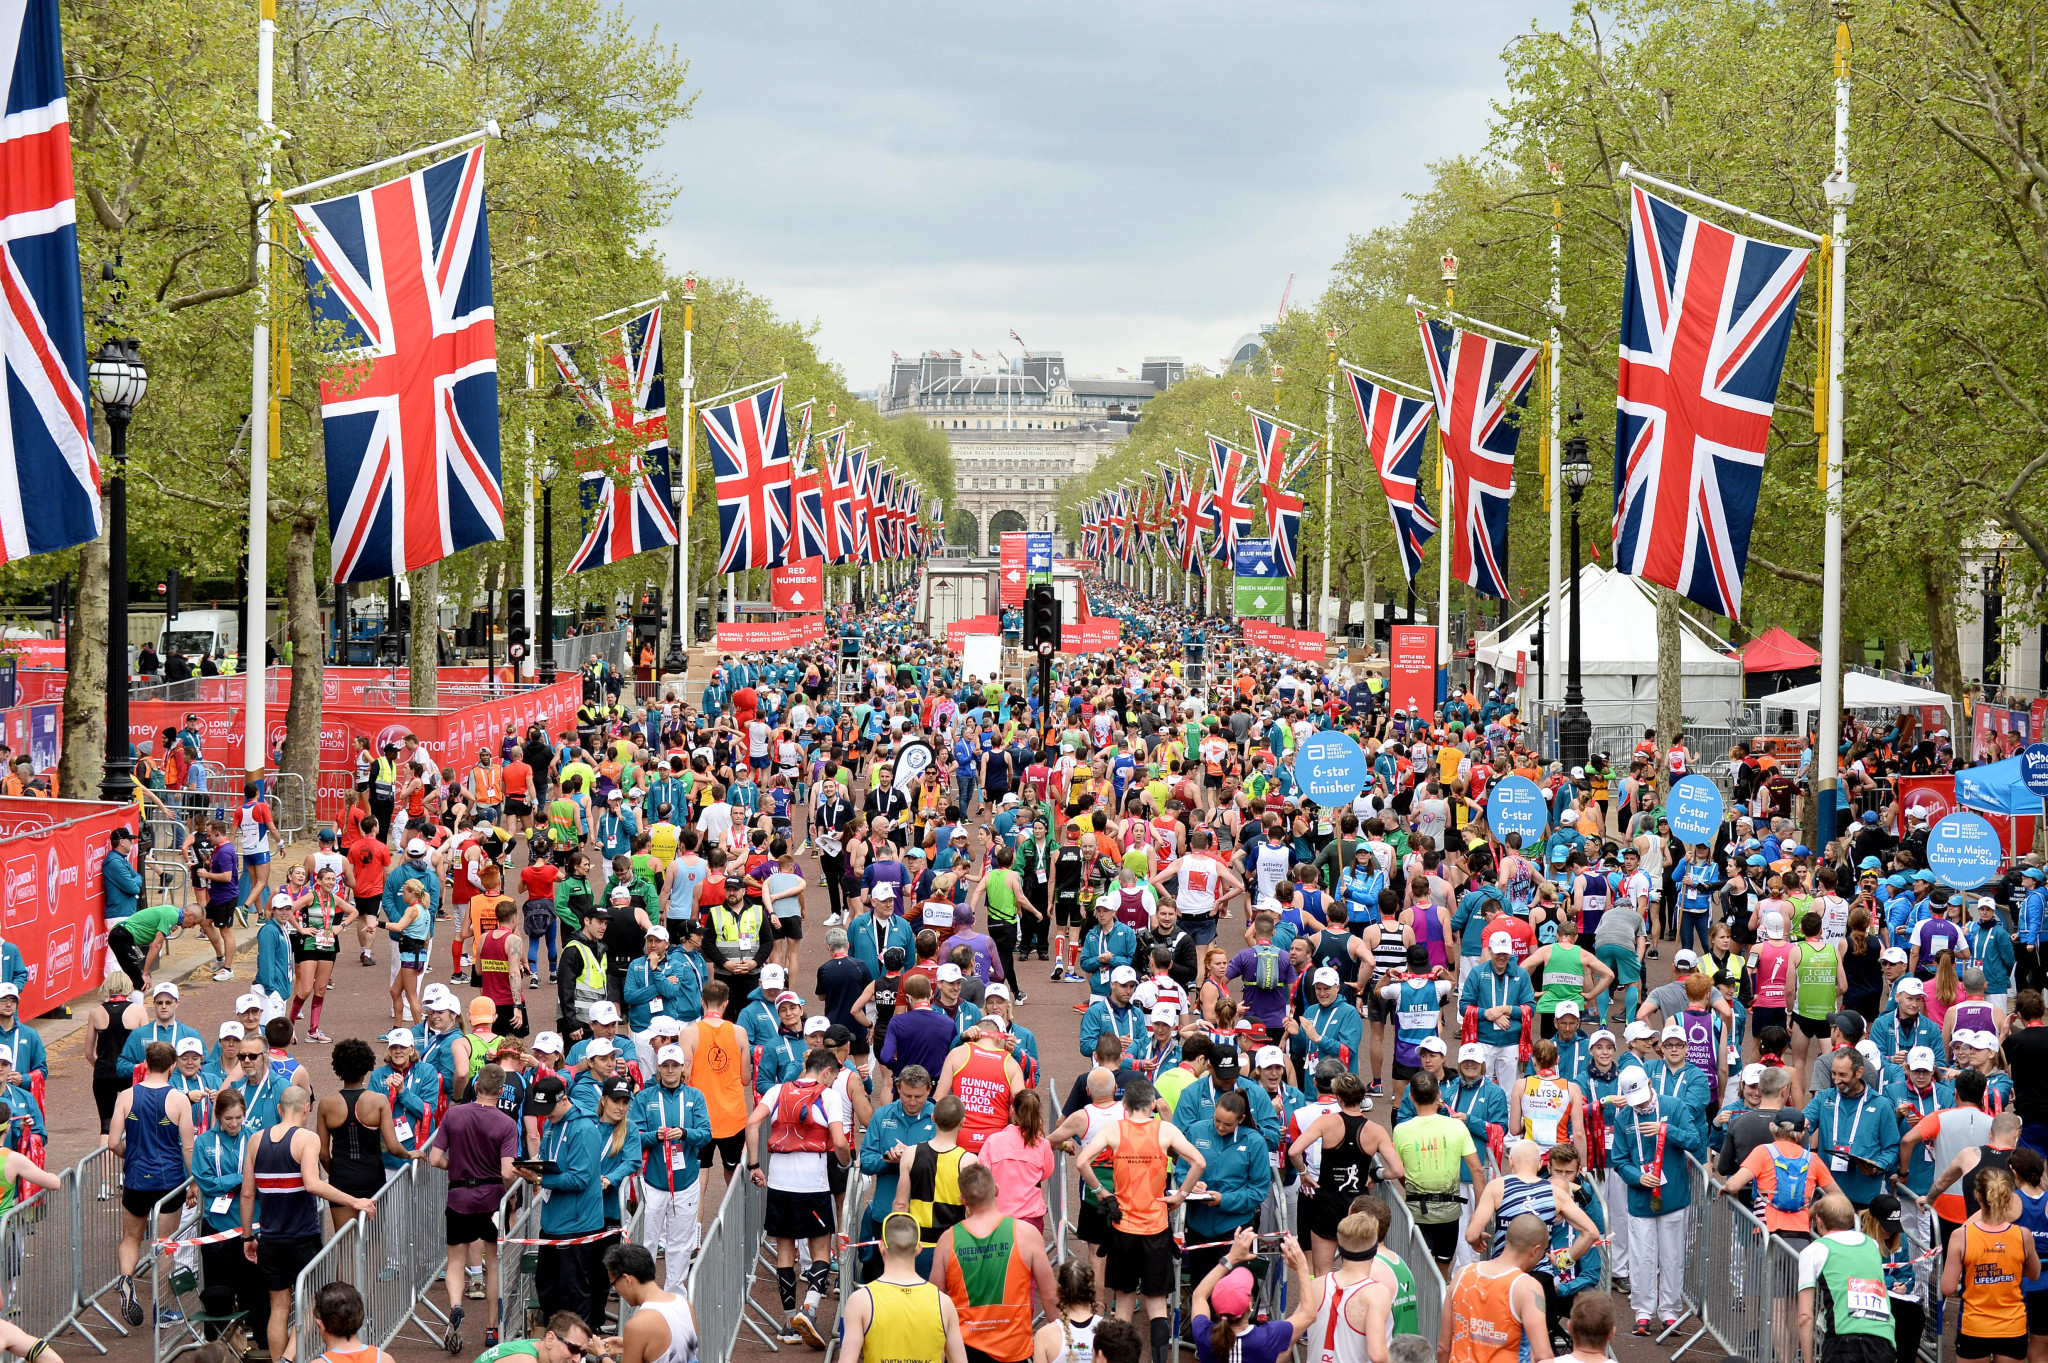 London Marathon organisers "cannot be certain" of race taking place in October